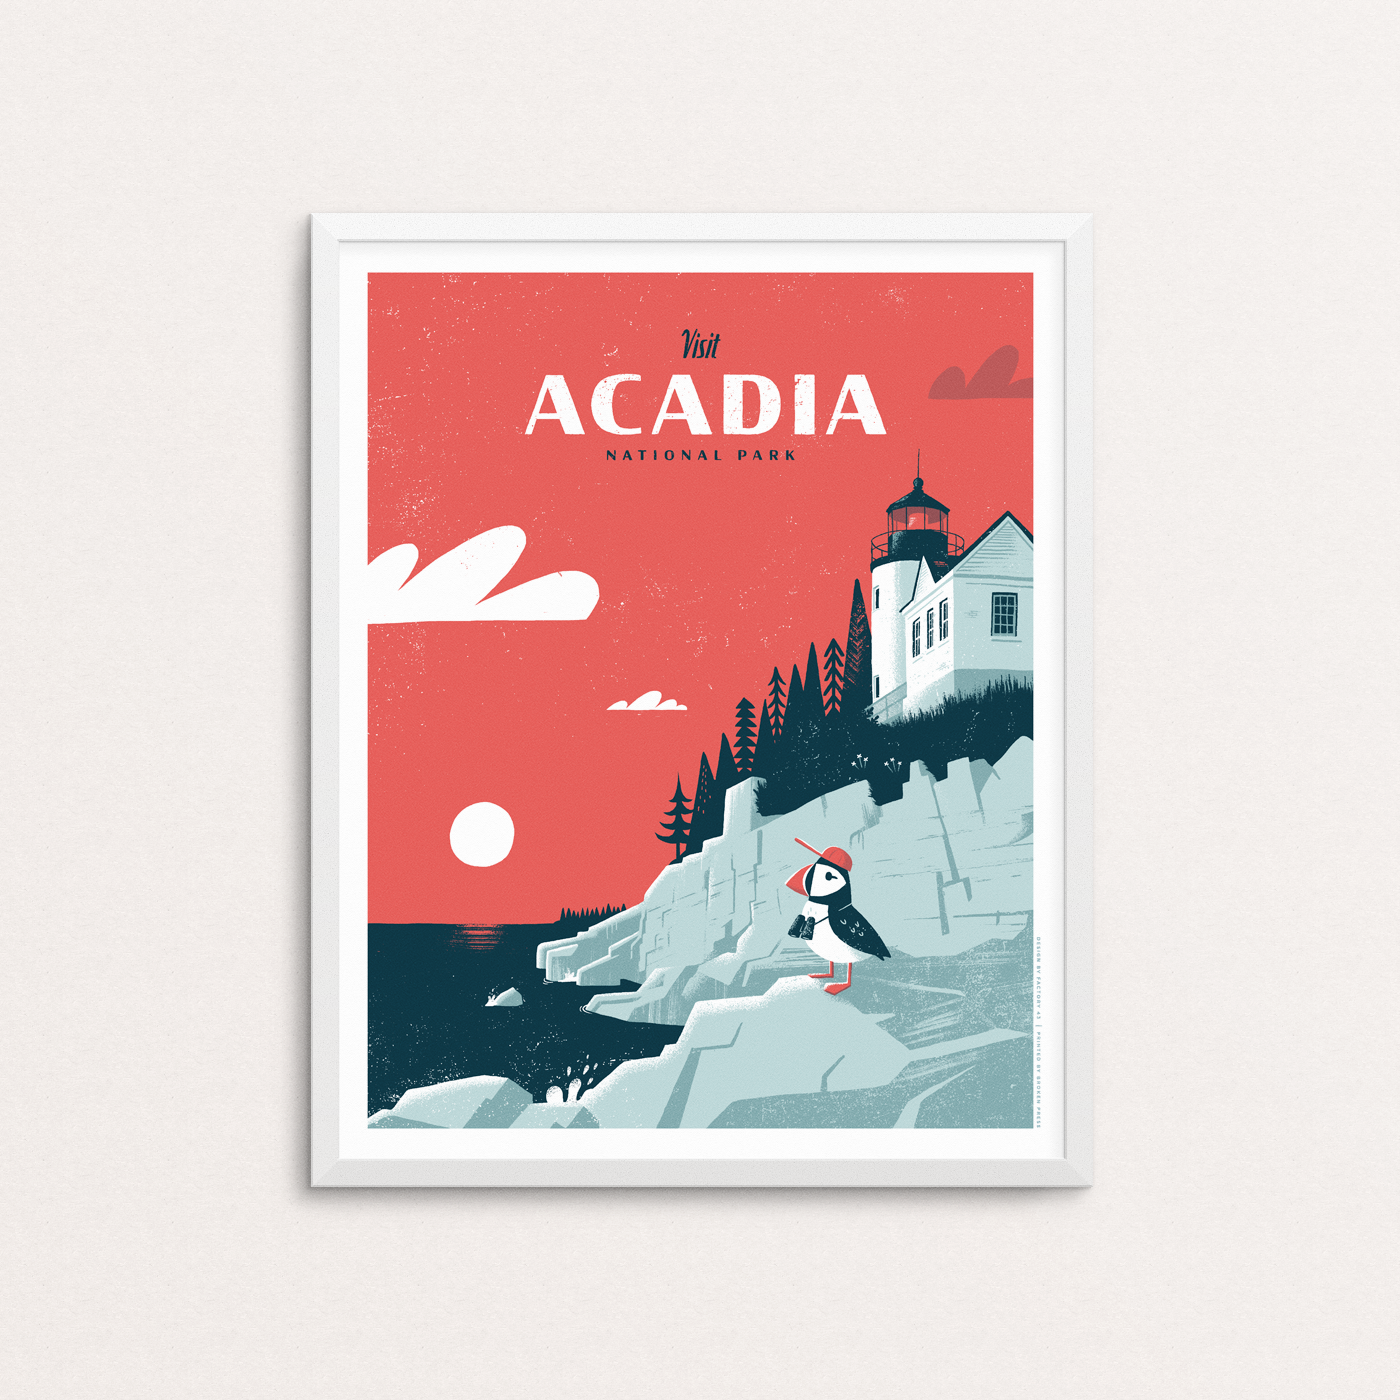 Acadia National Park poster featuring a puffin wearing a hat and binoculars near the Baker Island Light Station lighthouse in Maine.